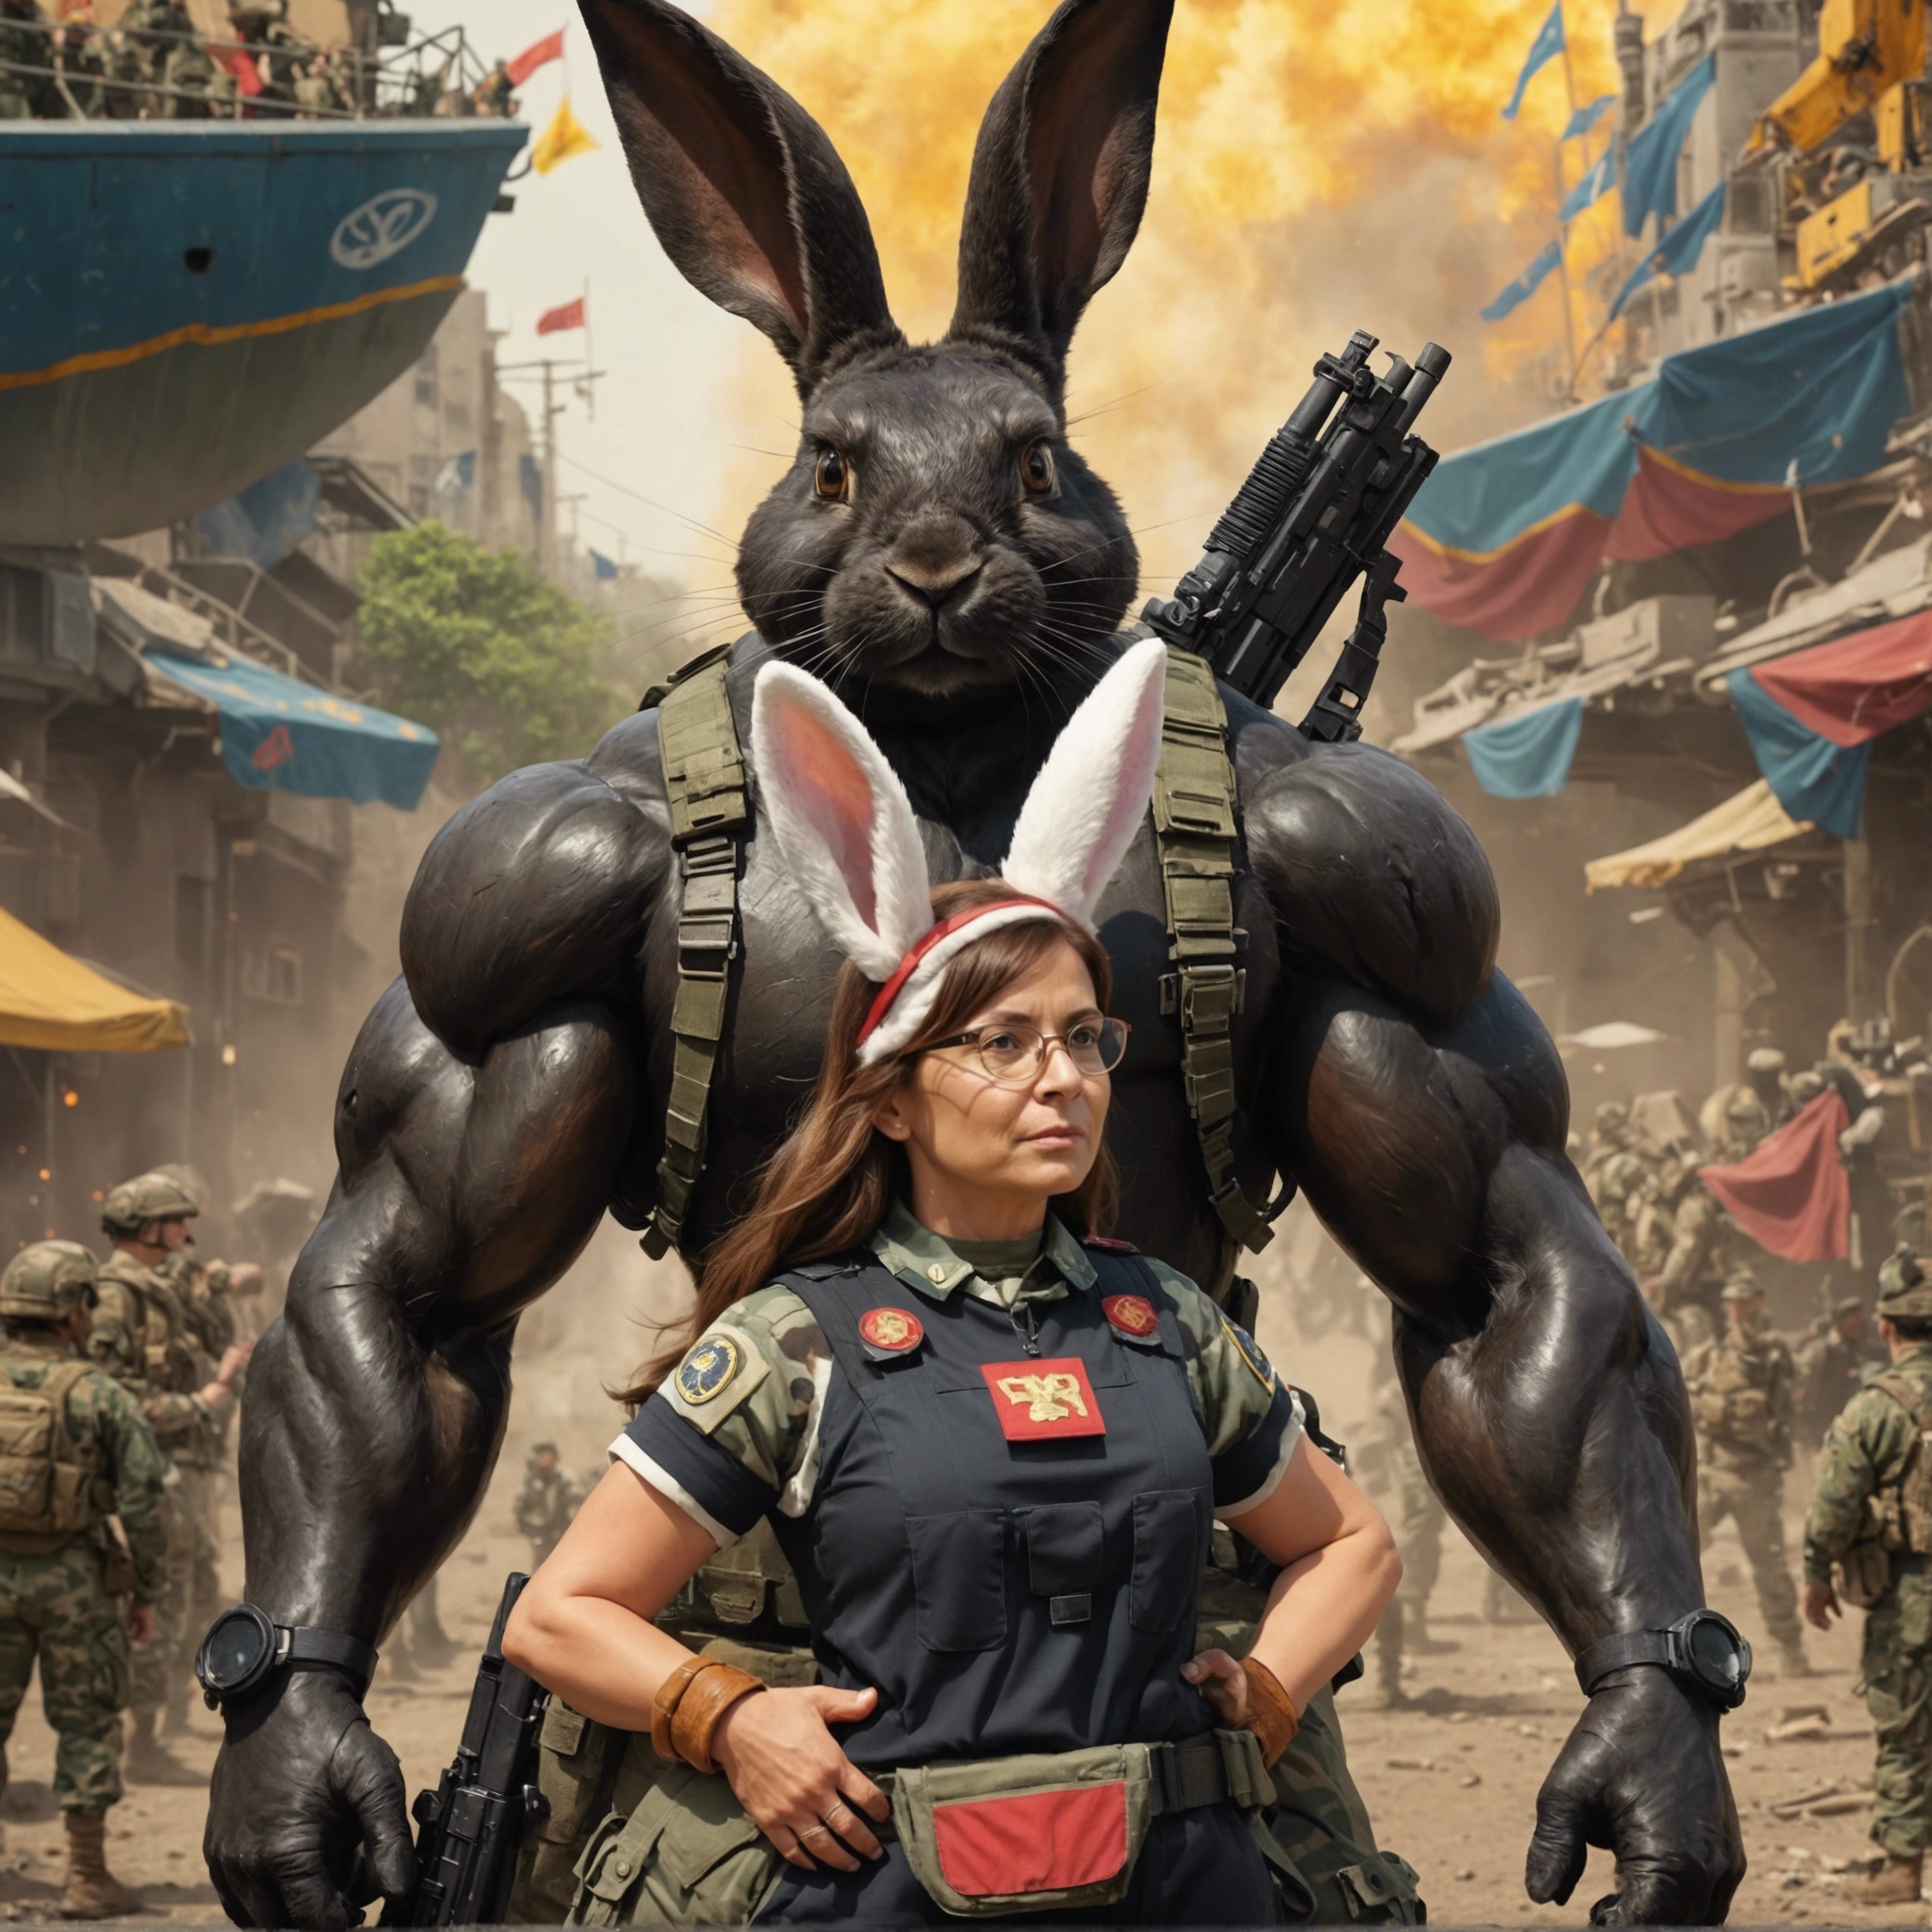 A small, middle aged woman with bunny ears in military fatigues, standing in front of a giant, anthropomorphic rabbit at the outbreak of a battle